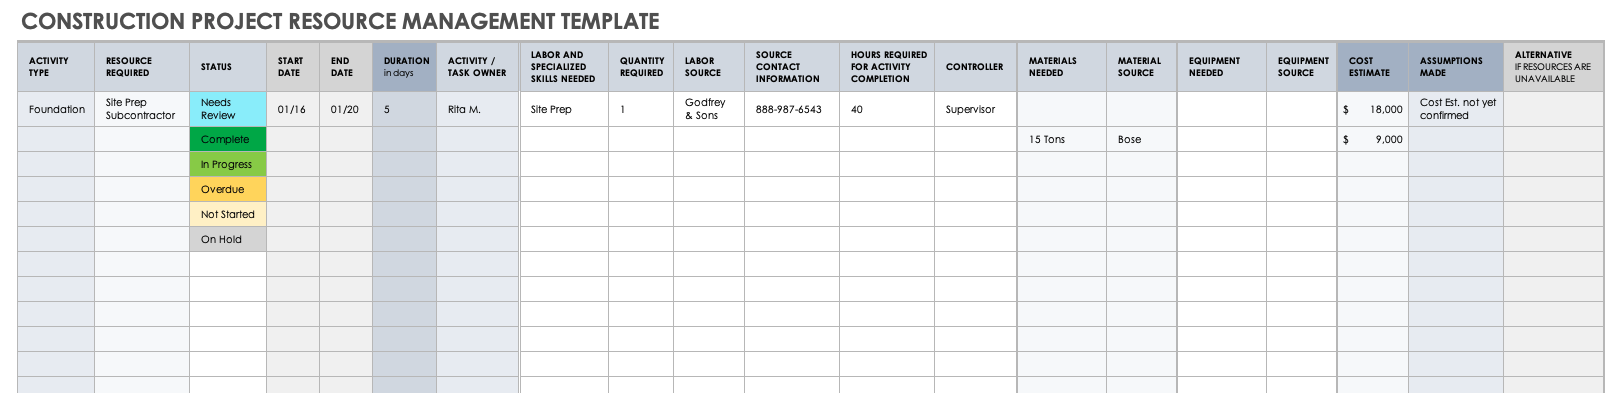 Construction Project Resource Management Template